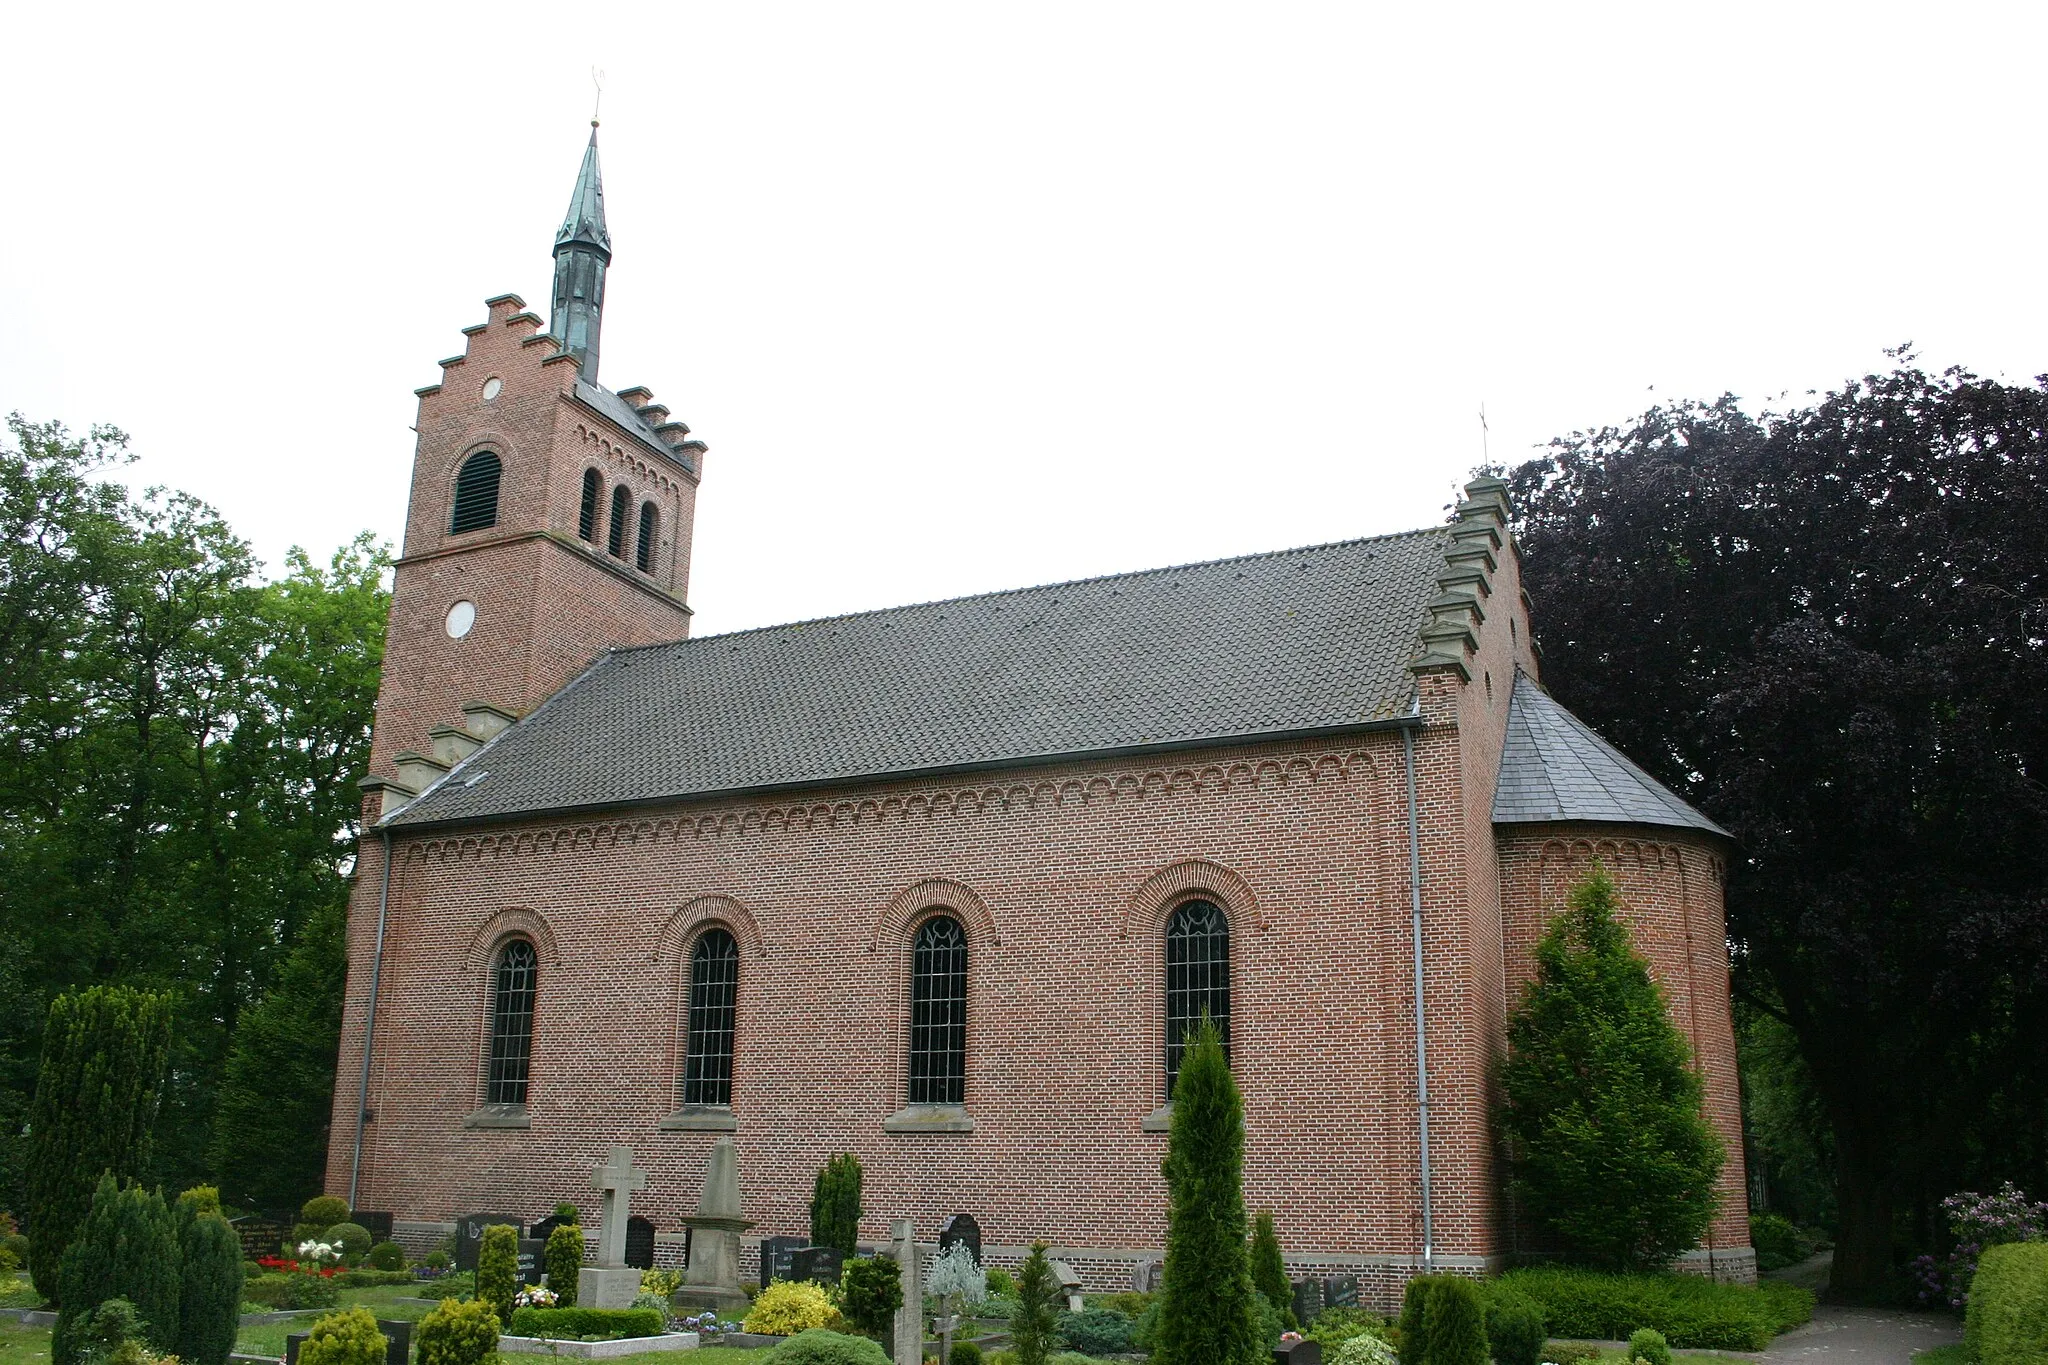 Photo showing: Historic St. Martin Church in Potshausen, district of Leer, East Frisia, Germany